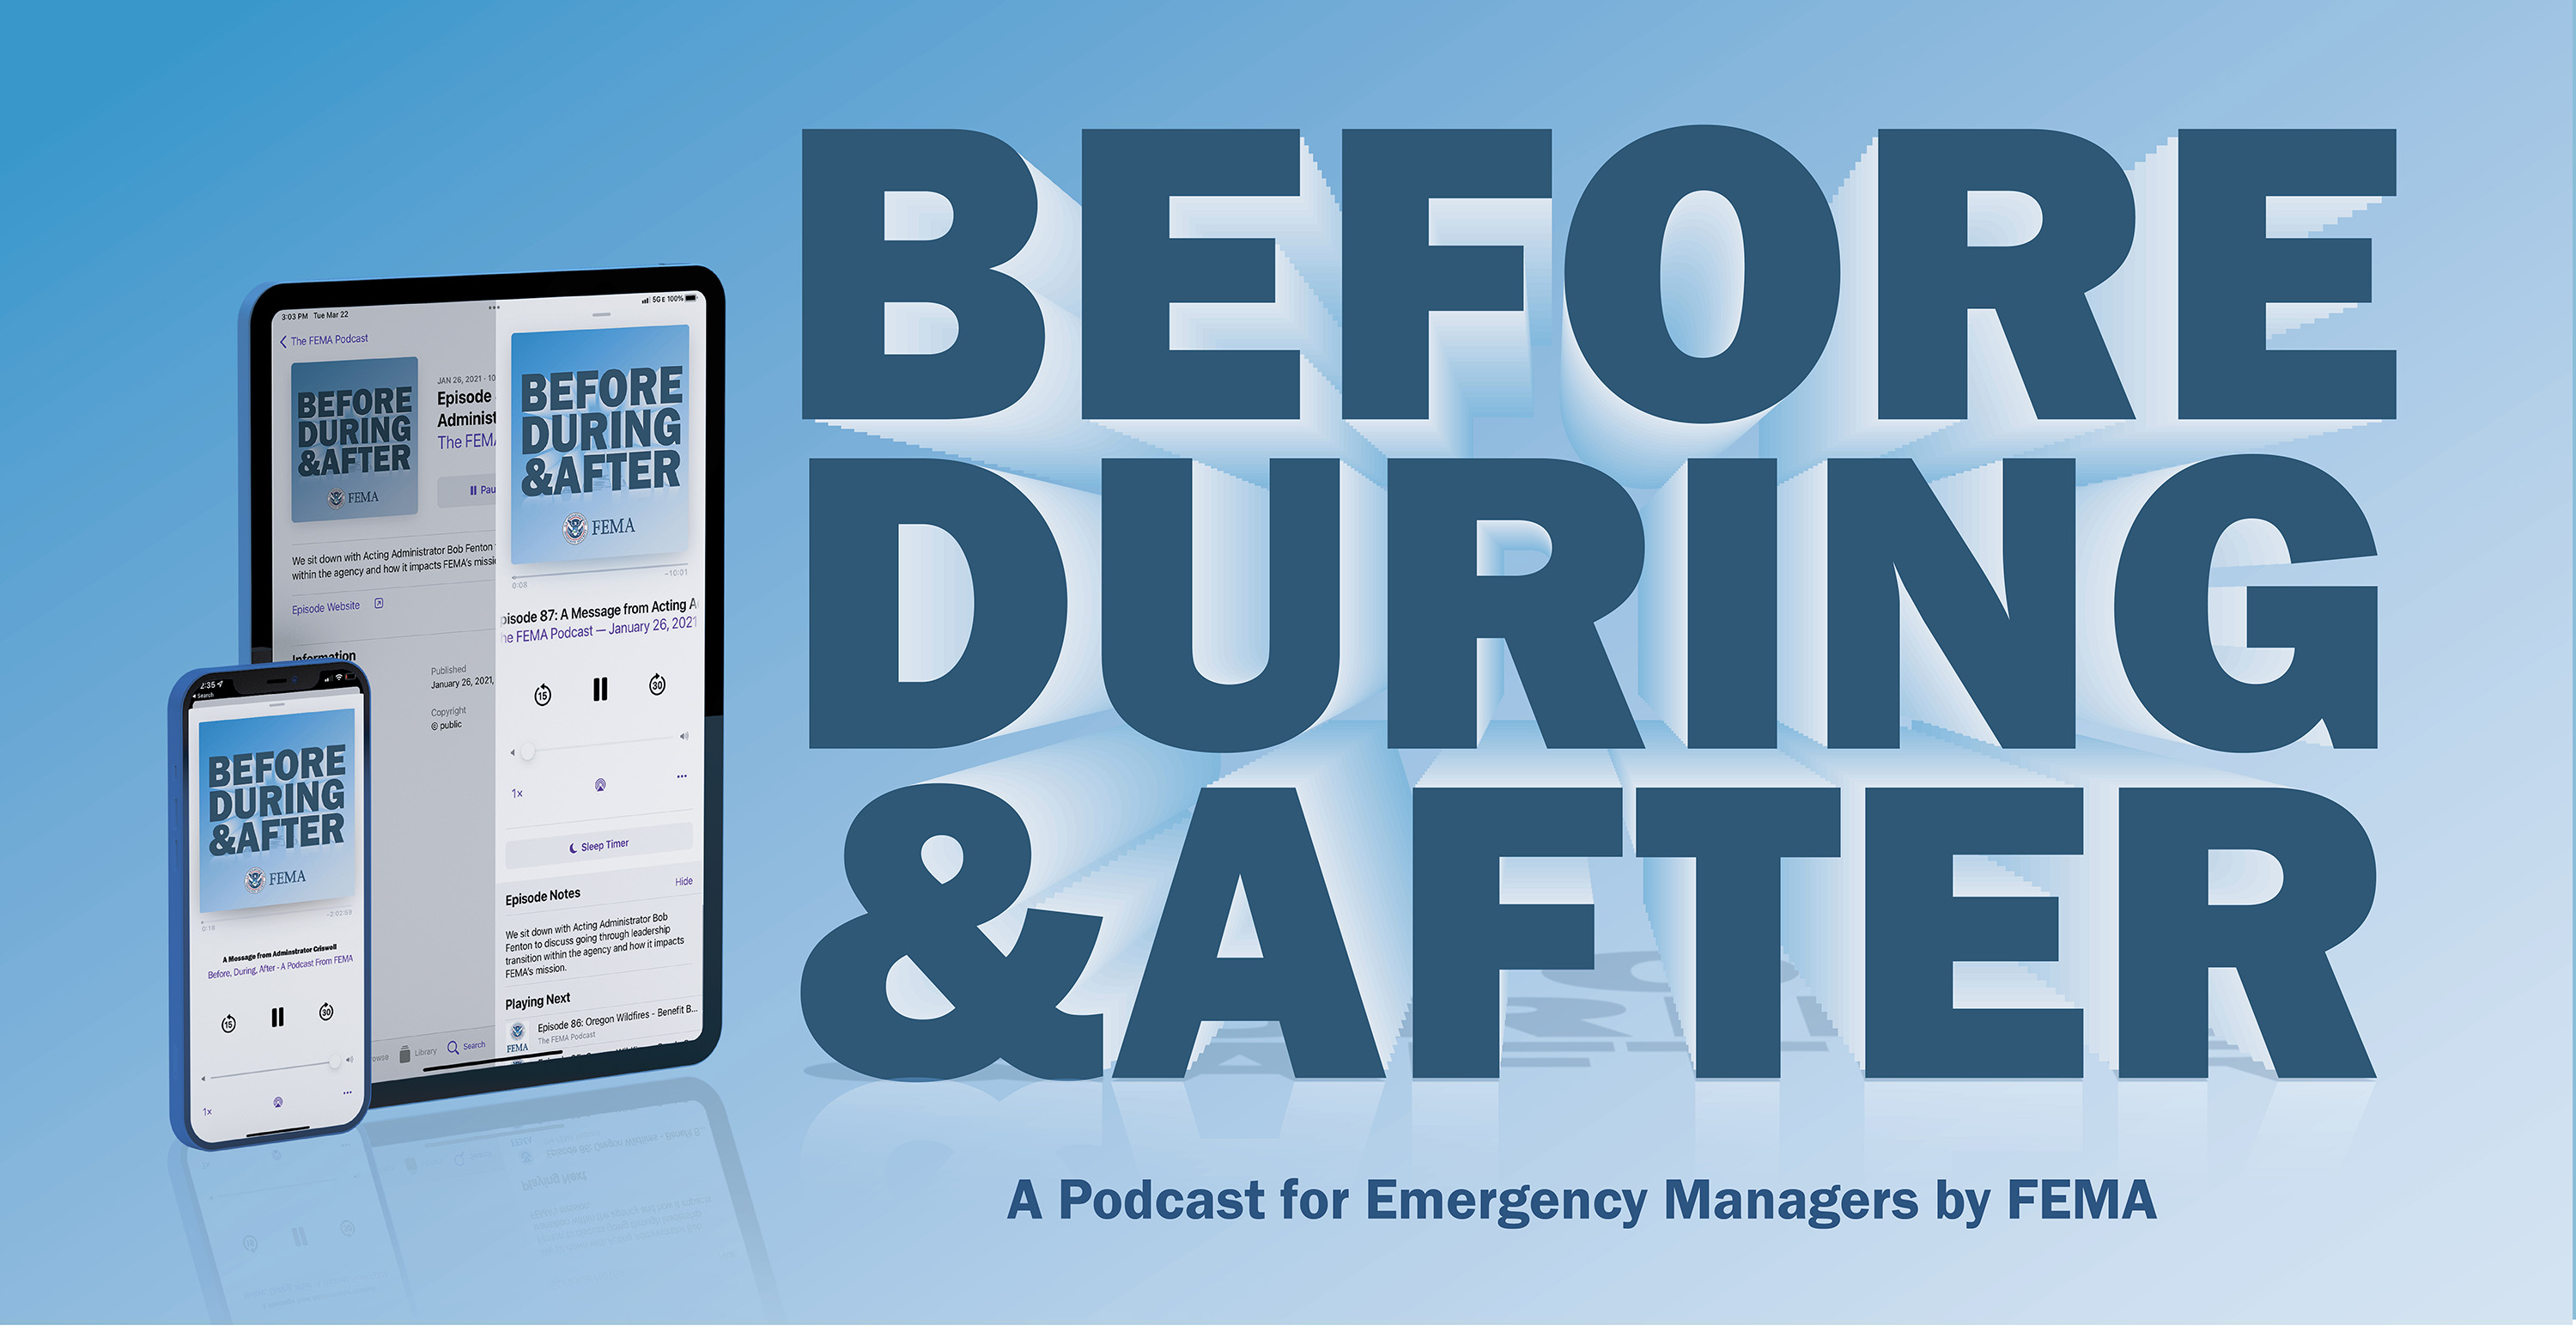 Before During & After: A Podcast for Emergency Managers by FEMA